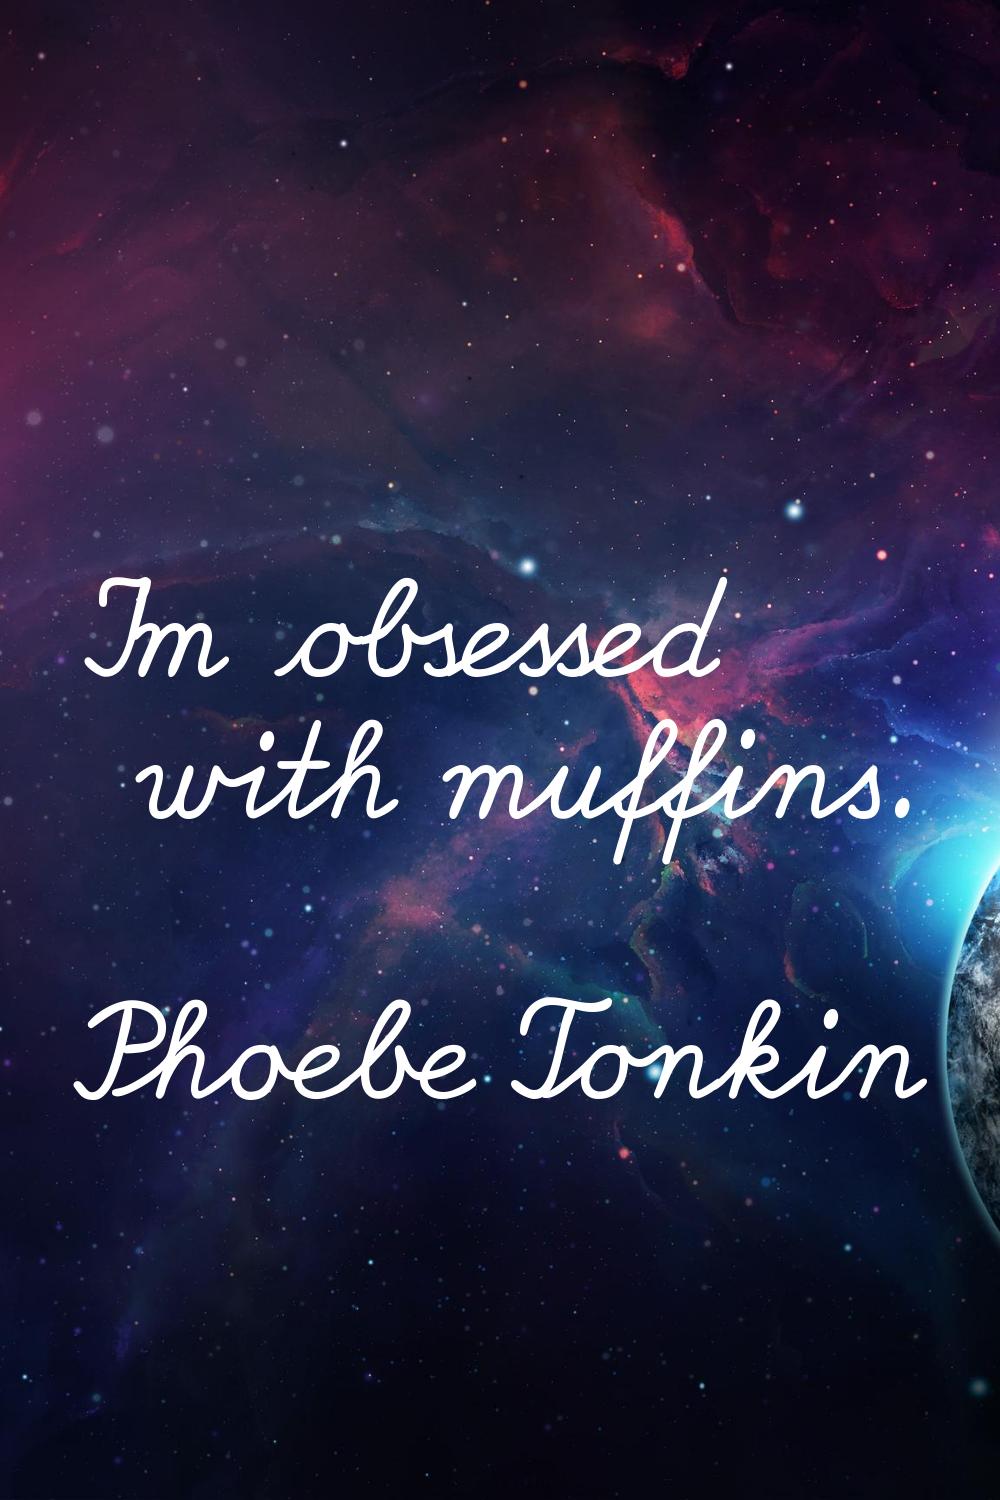 I'm obsessed with muffins.